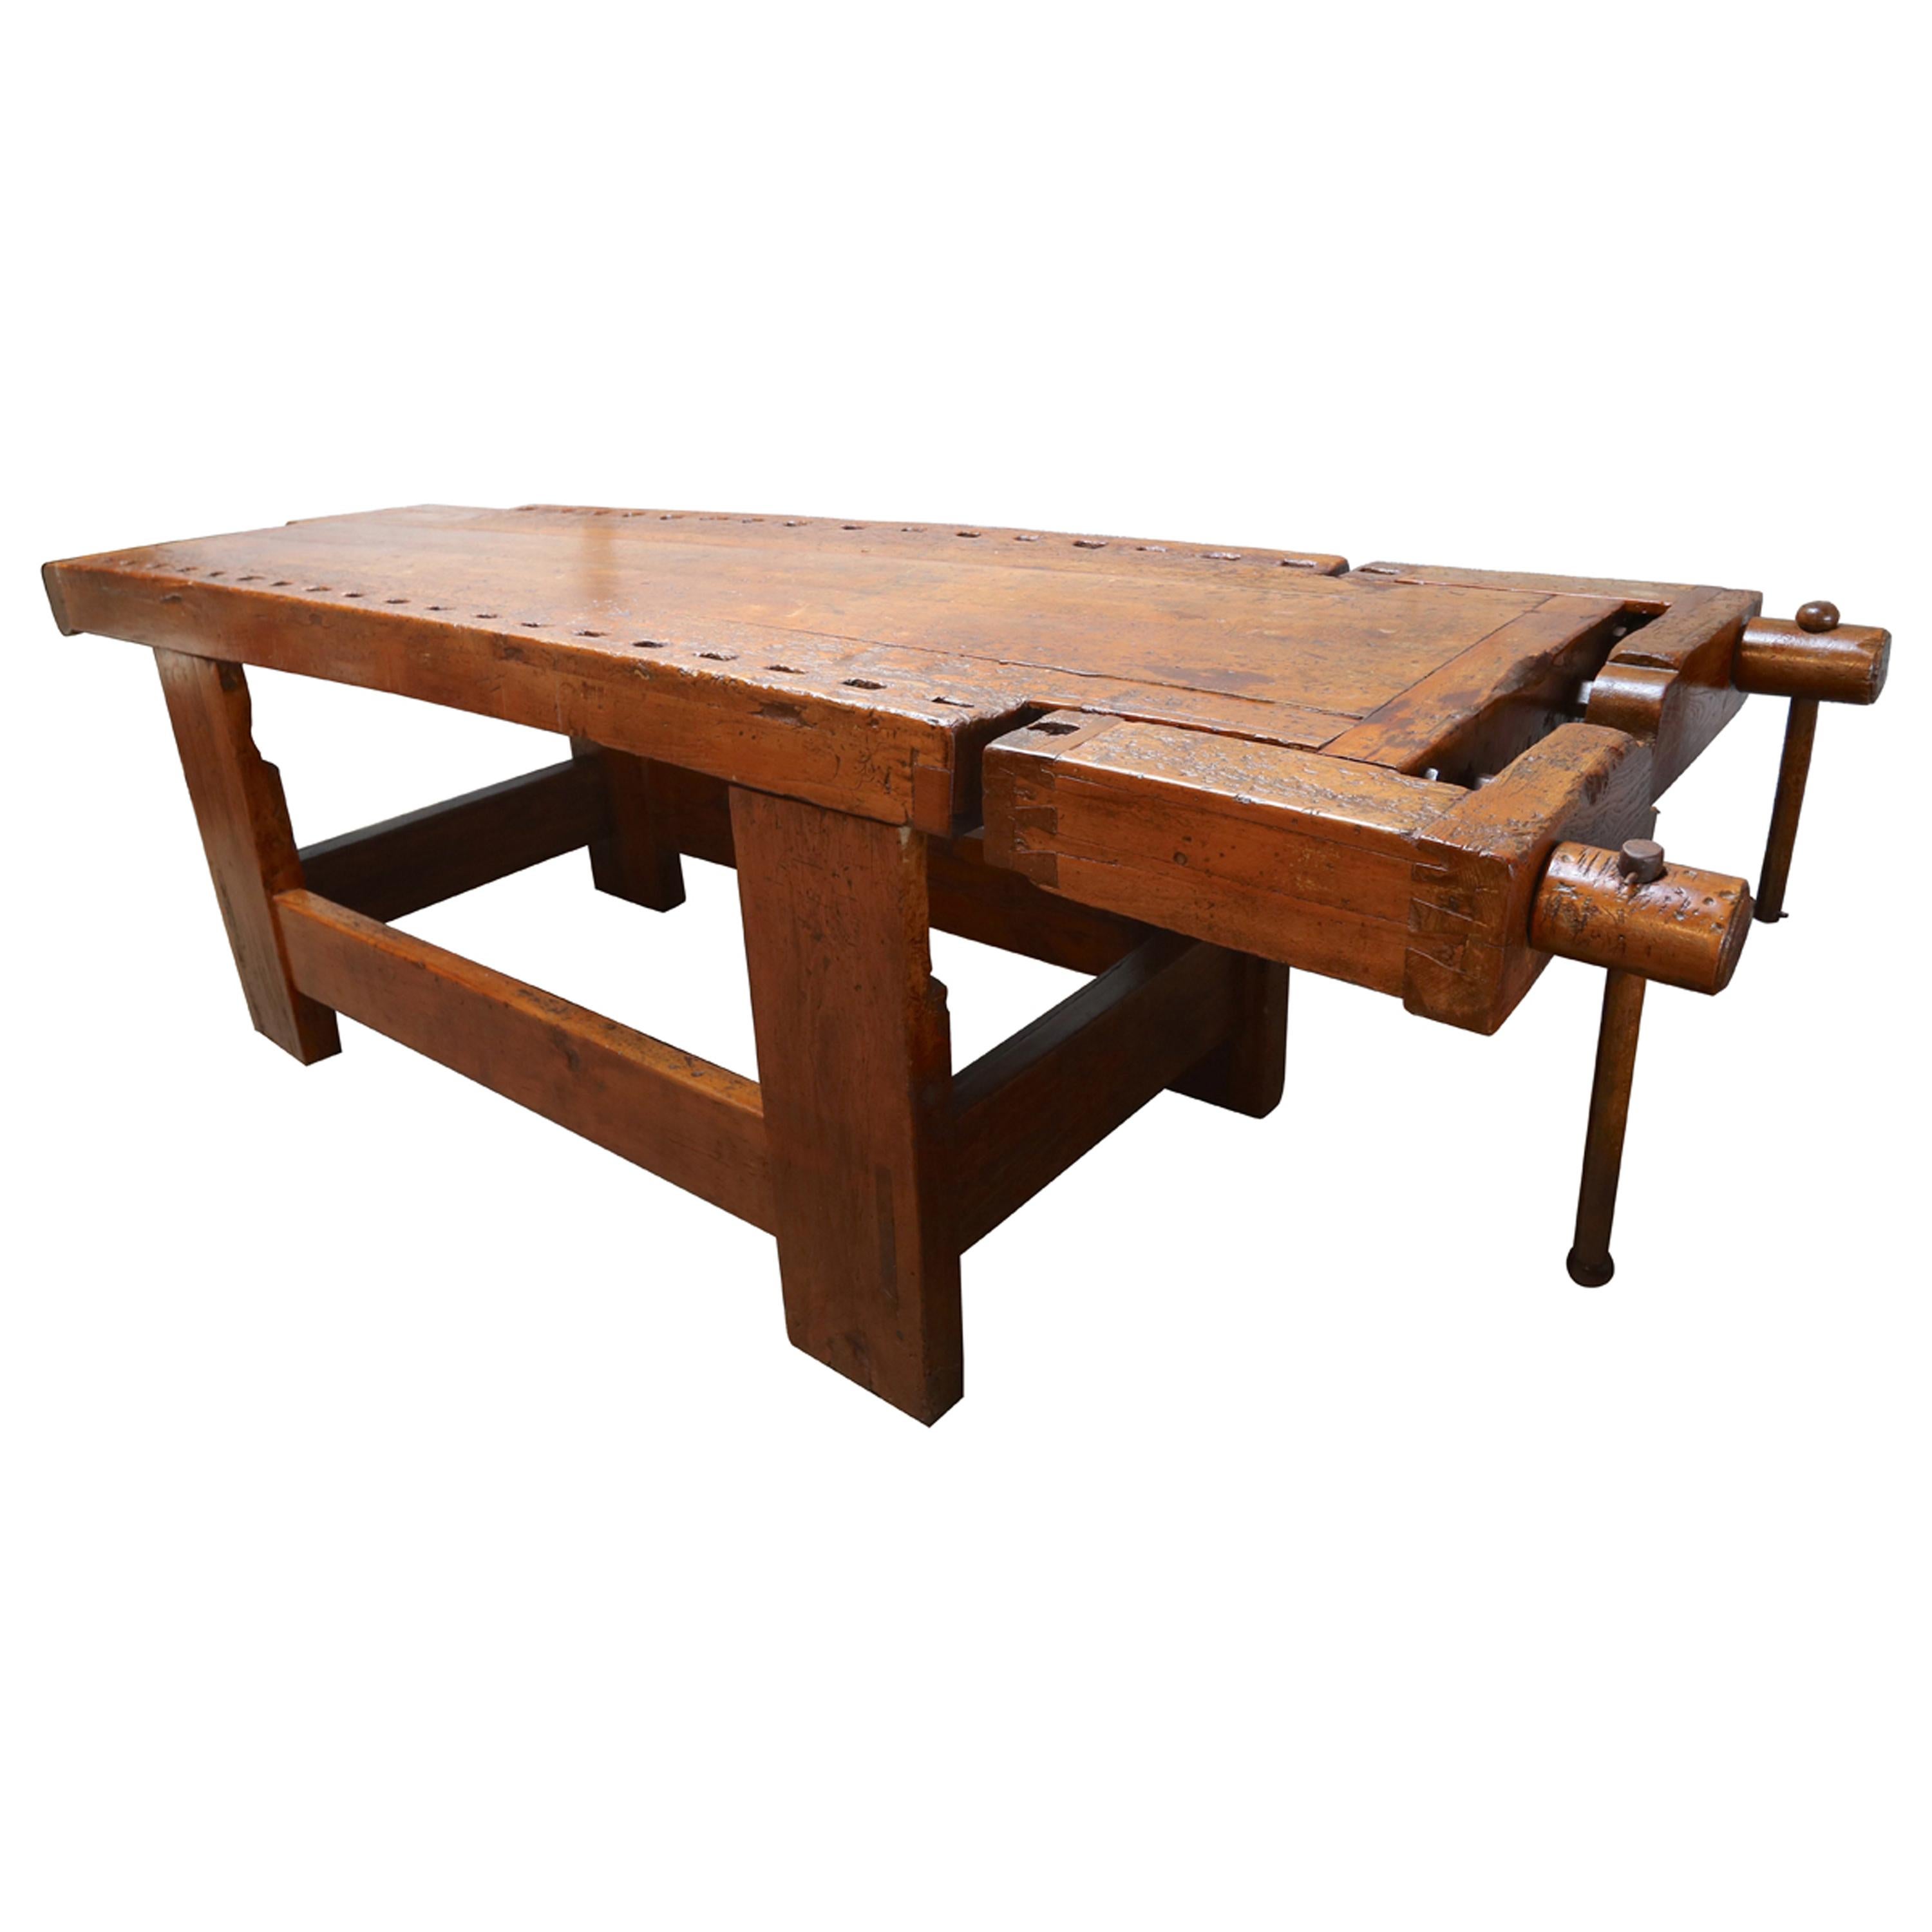 1920s Italian Wooden Carpenter's Bench with Three Working Vices